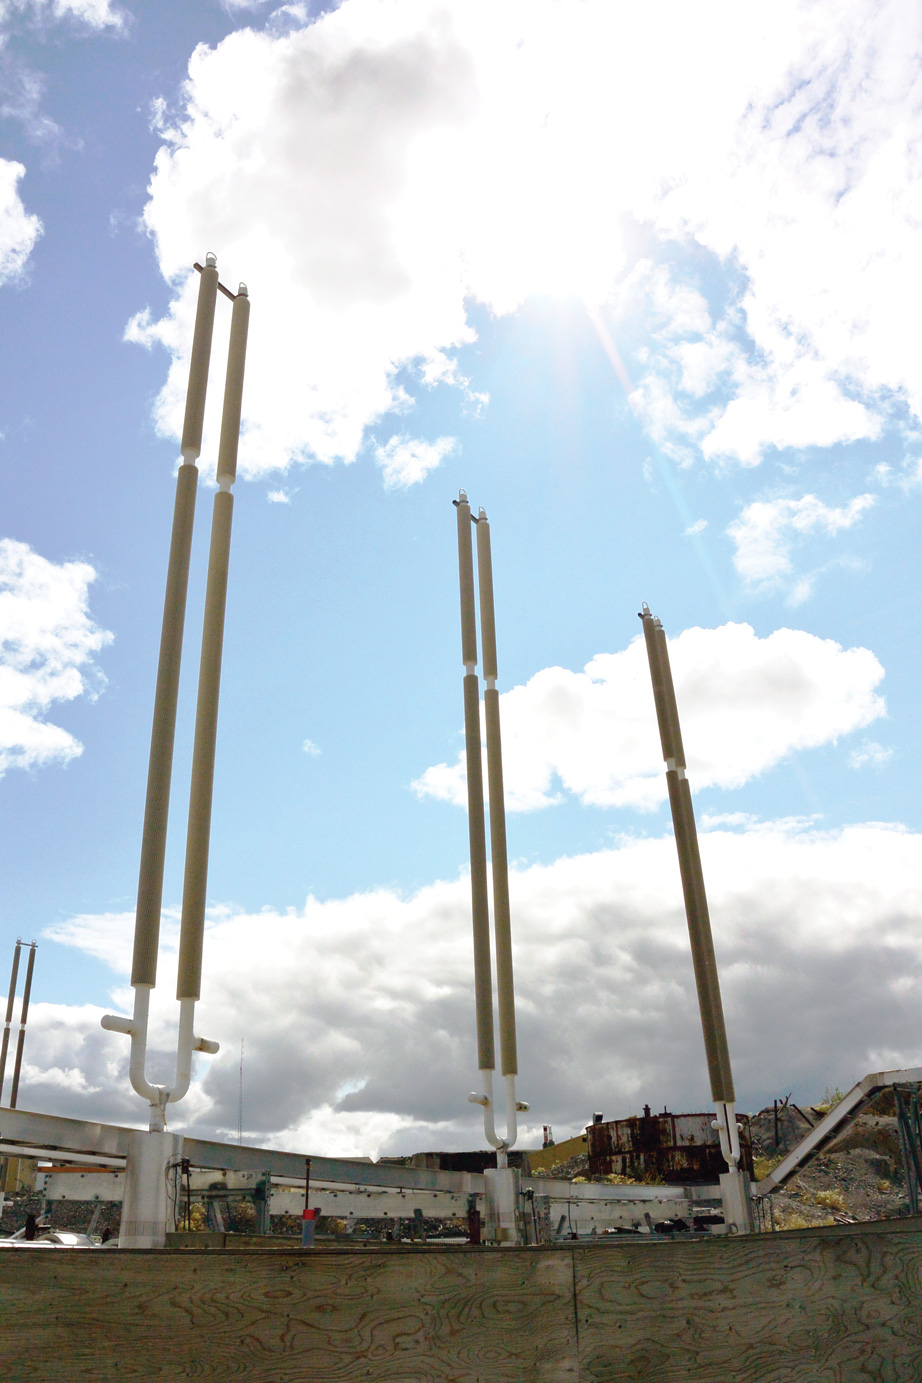 Thermosyphons, which are long vertical pipes sticking out of the ground, with an old building visible in the background.